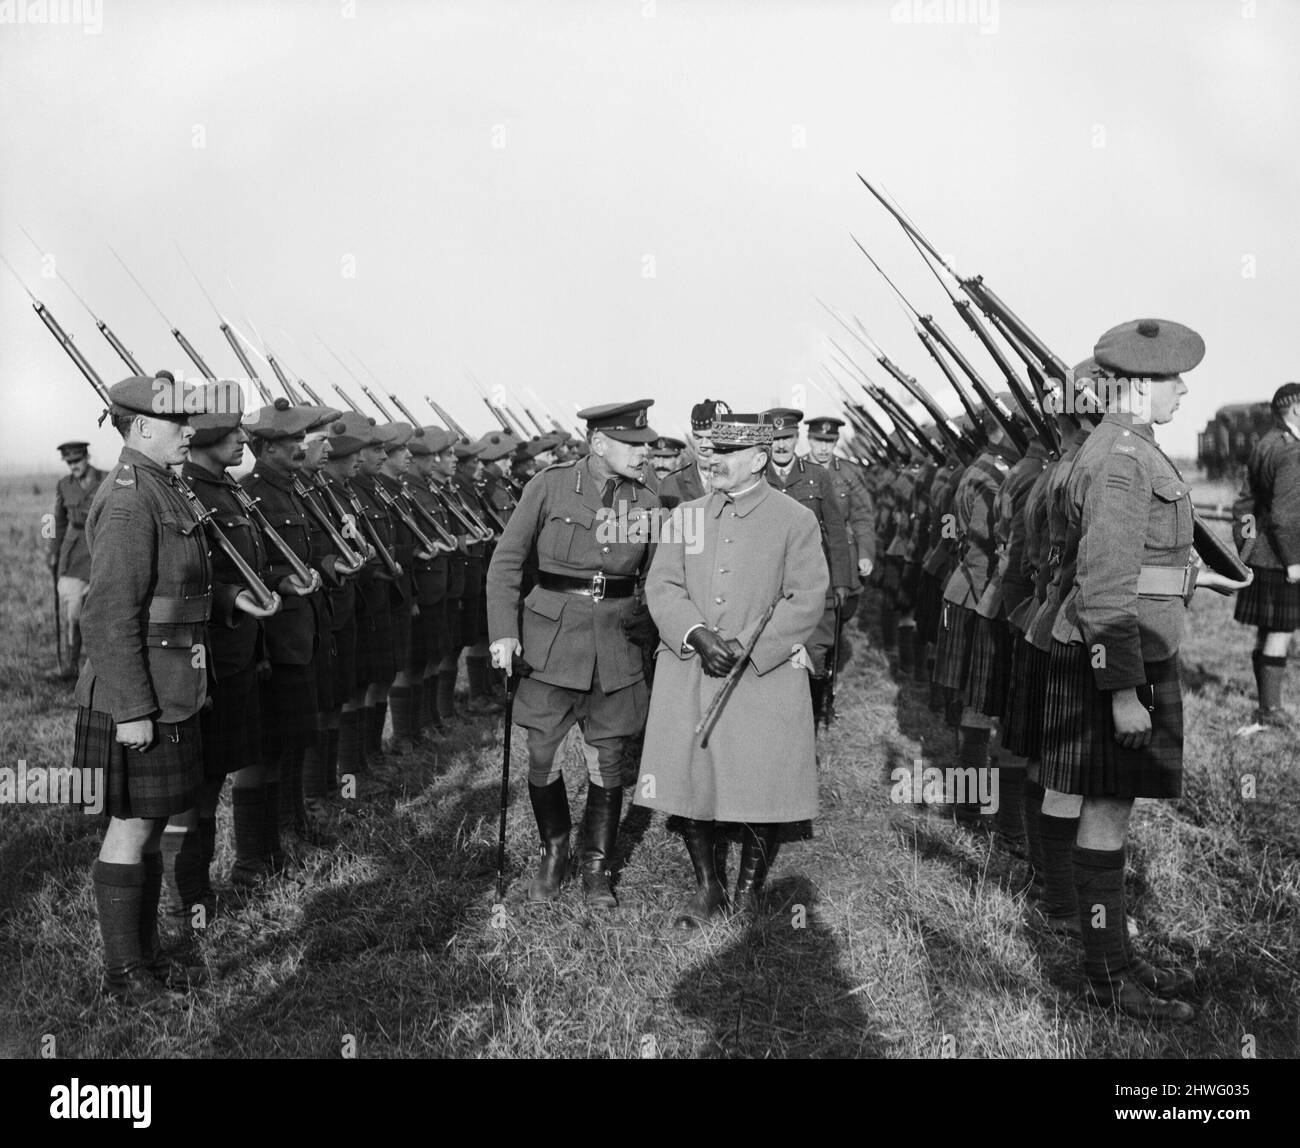 Marshal Ferdinand Foch, the Supreme Commander of the Allied Forces, and Field Marshal Douglas Haig, the C-in-C of the British Army, inspecting the Guard of Honour of the C Company, 6th Battalion, Gordon Highlanders at Iwuy, 15 November 1918. Stock Photo